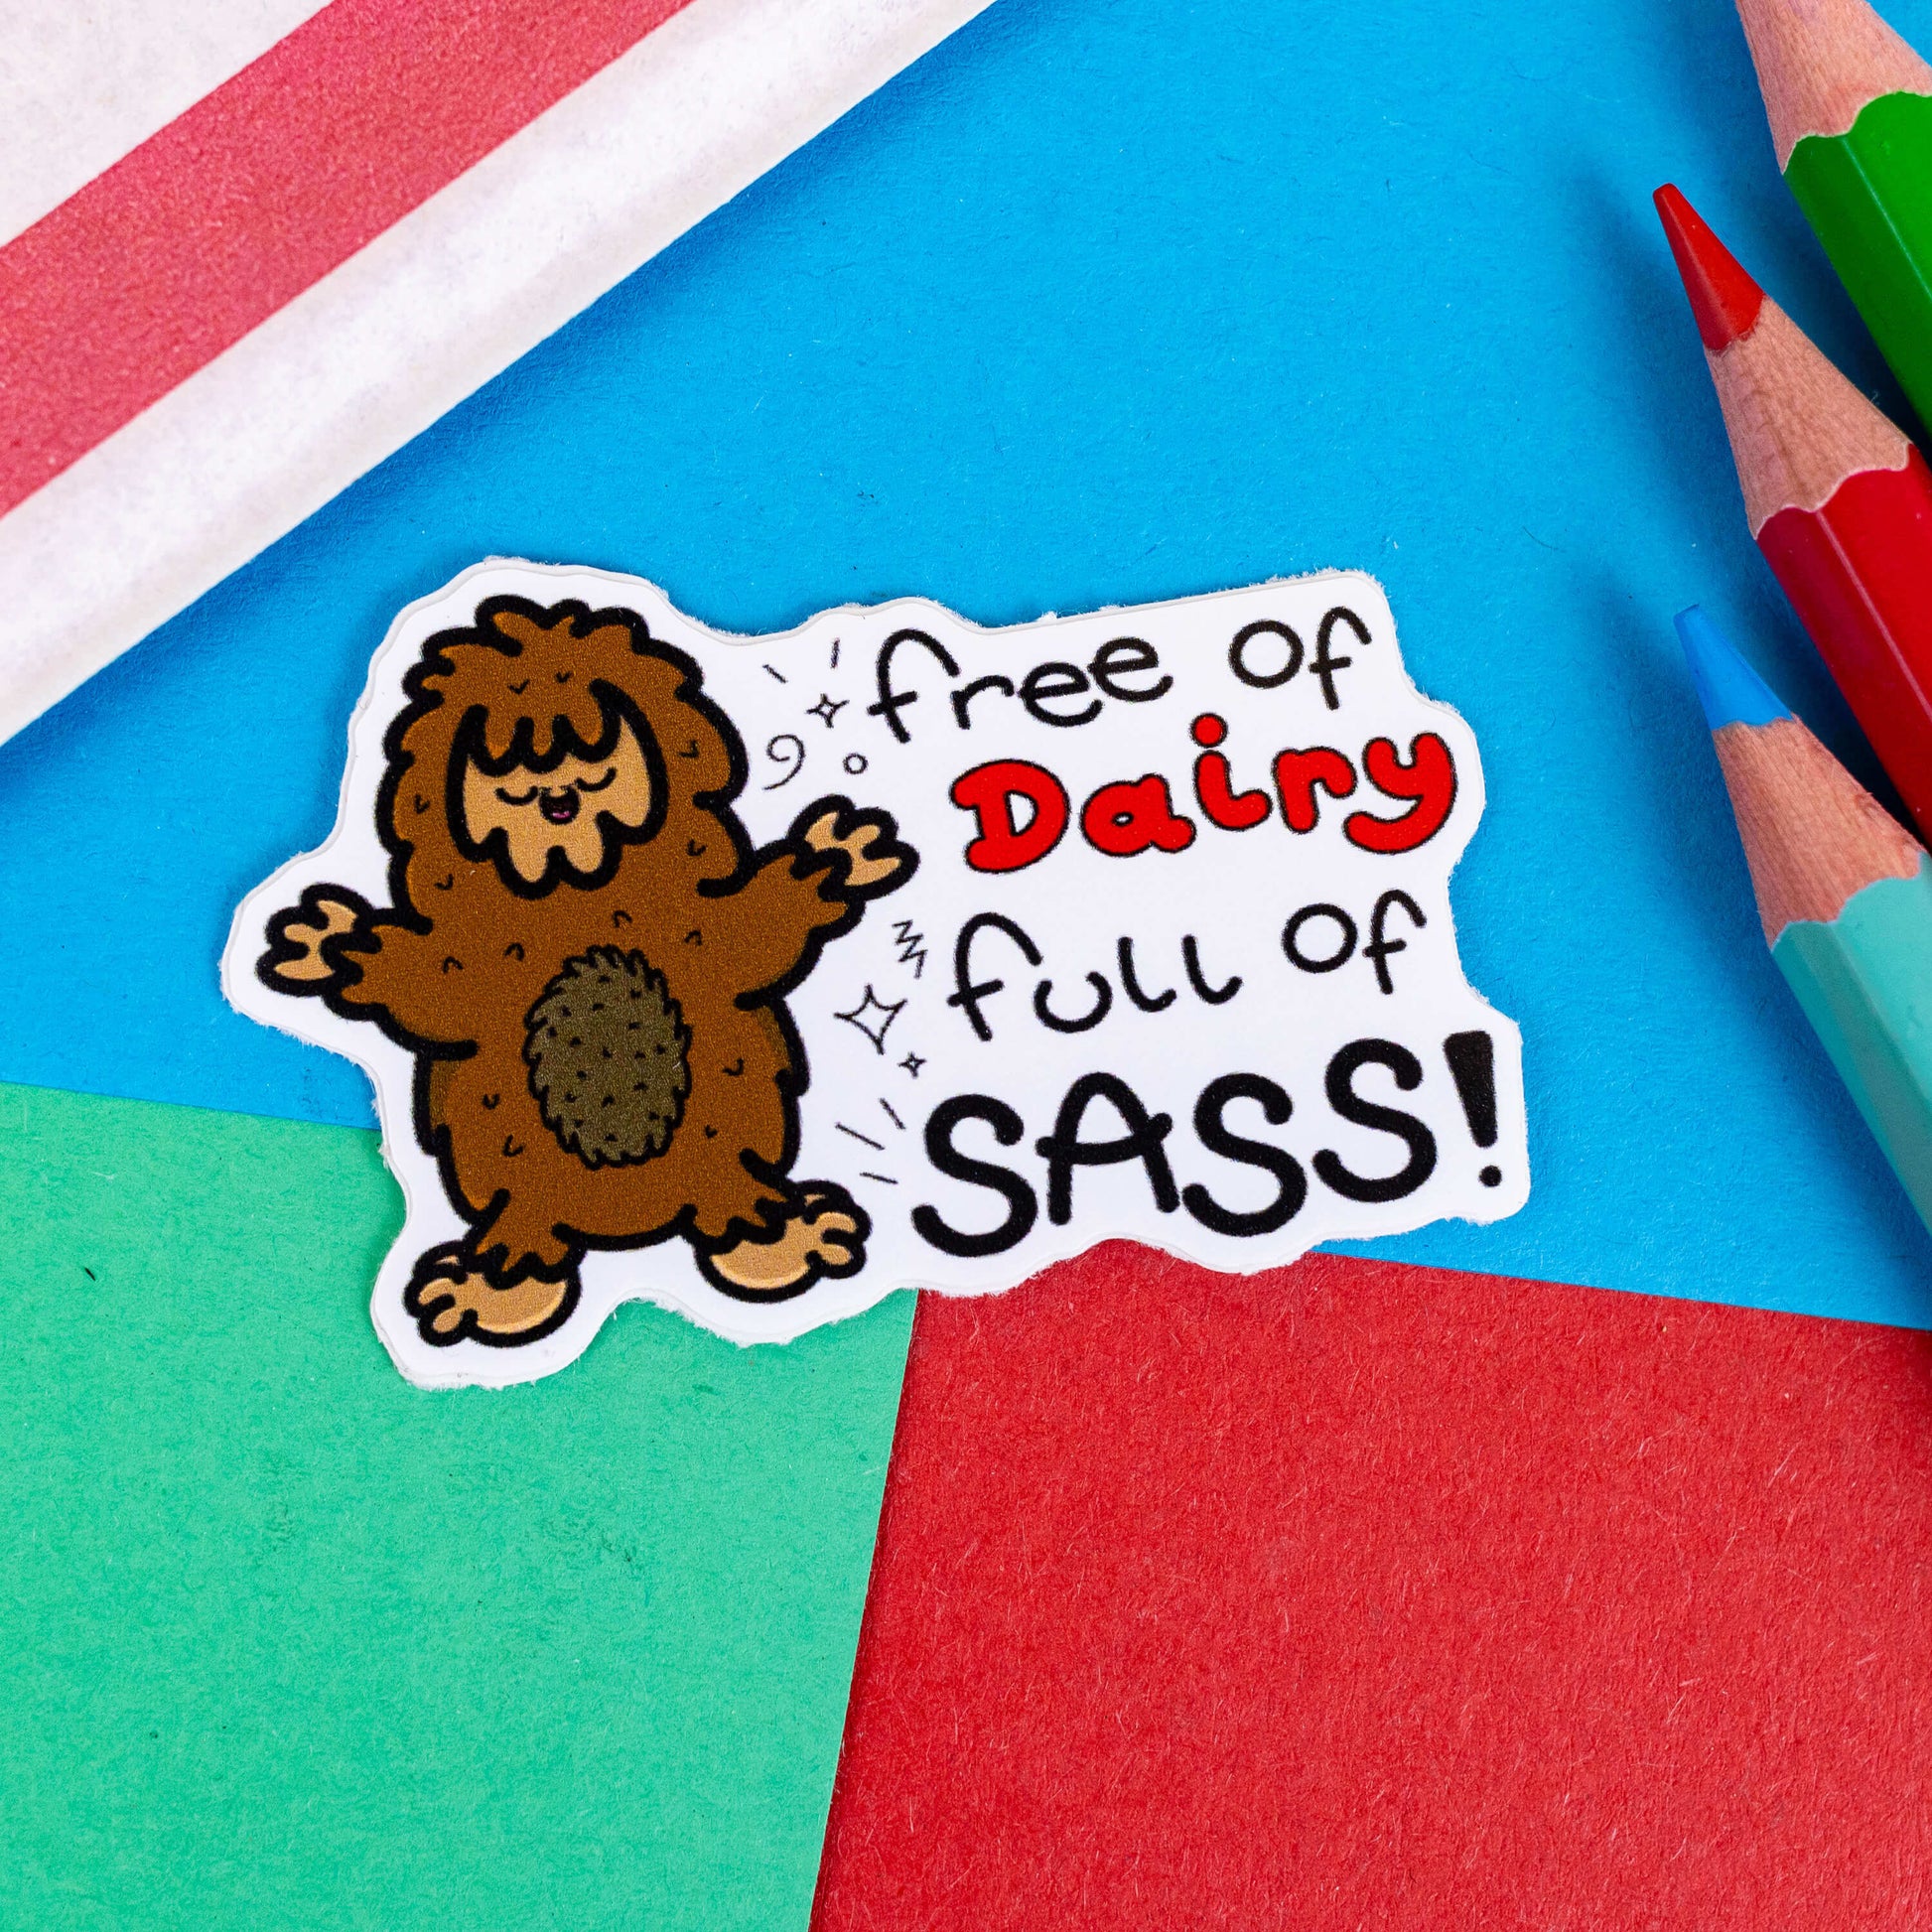 The Free of Dairy, Full of Sass! Sticker - Lactose Intolerant on a red, blue and green background with colouring pencils and a red stripe candy bag. The sticker features a smiling cheering brown sasquatch with black sparkles and text reading 'free of dairy full of sass!'. The design was created to raise awareness for lactose intolerance.